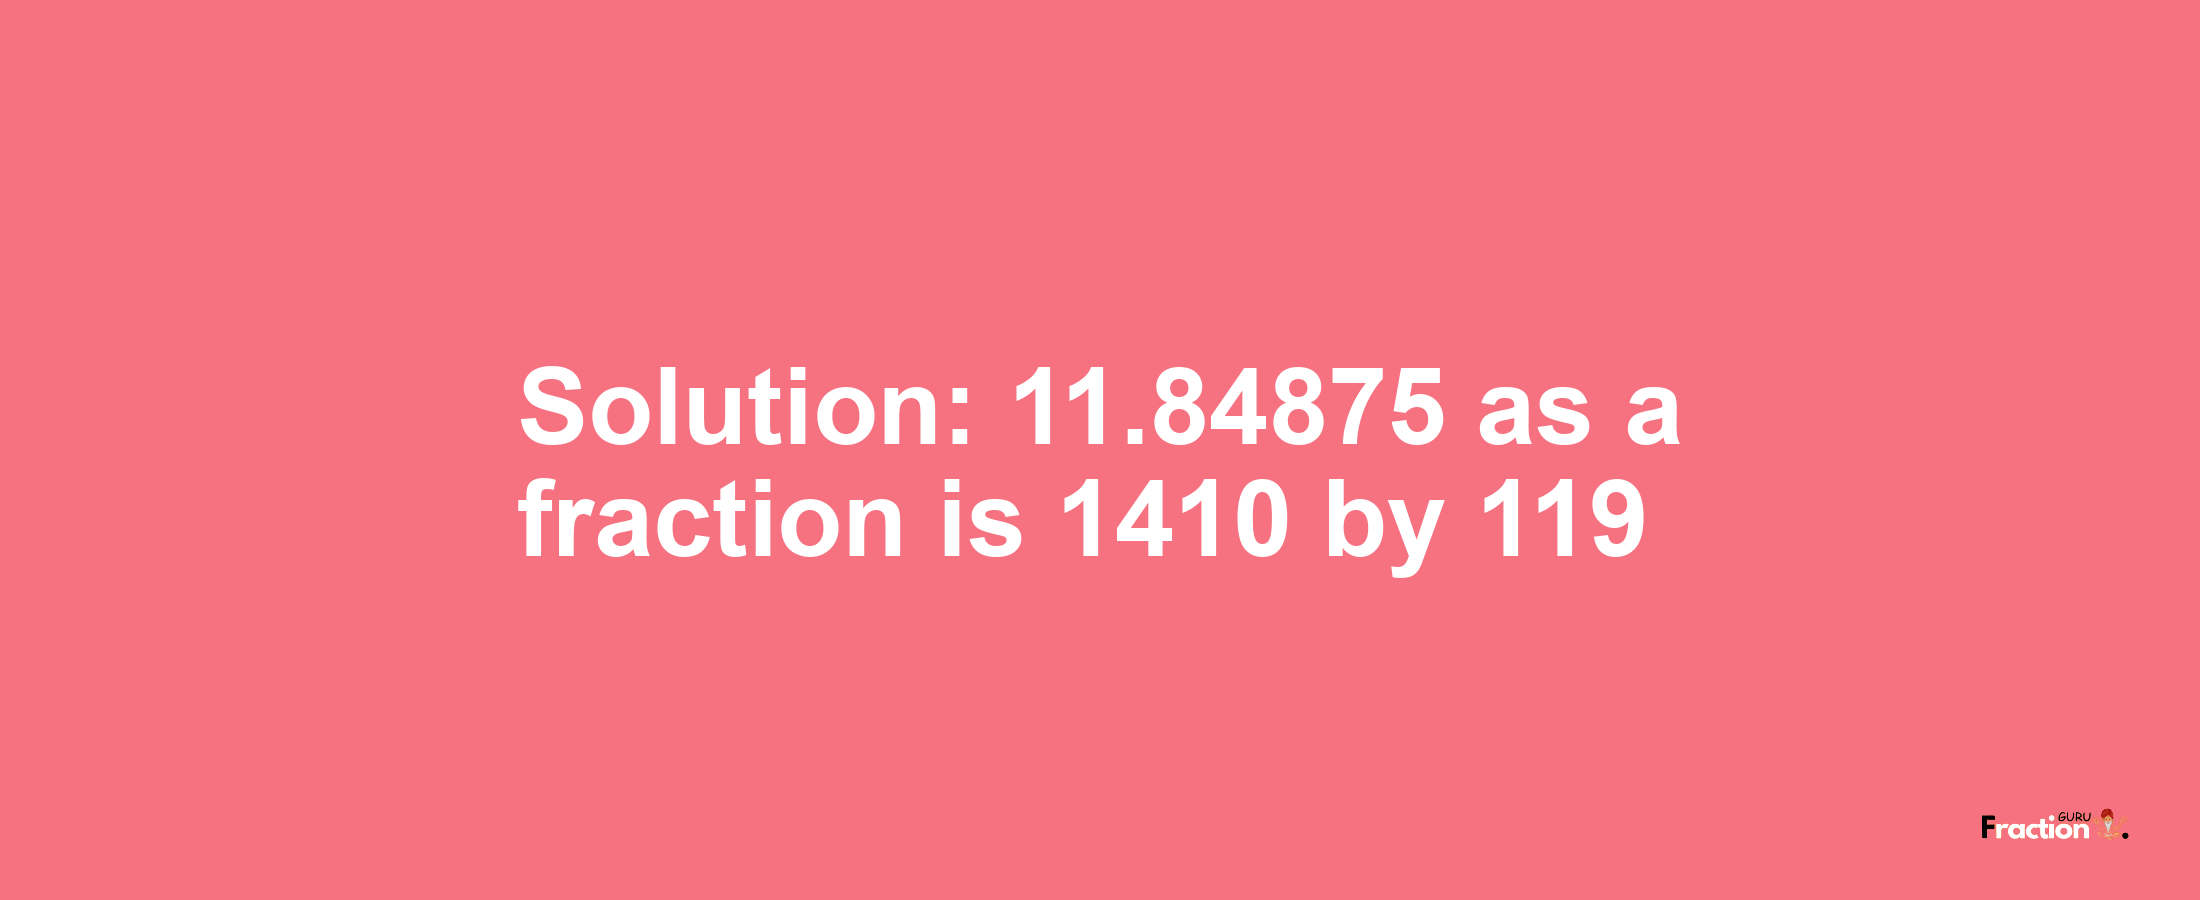 Solution:11.84875 as a fraction is 1410/119